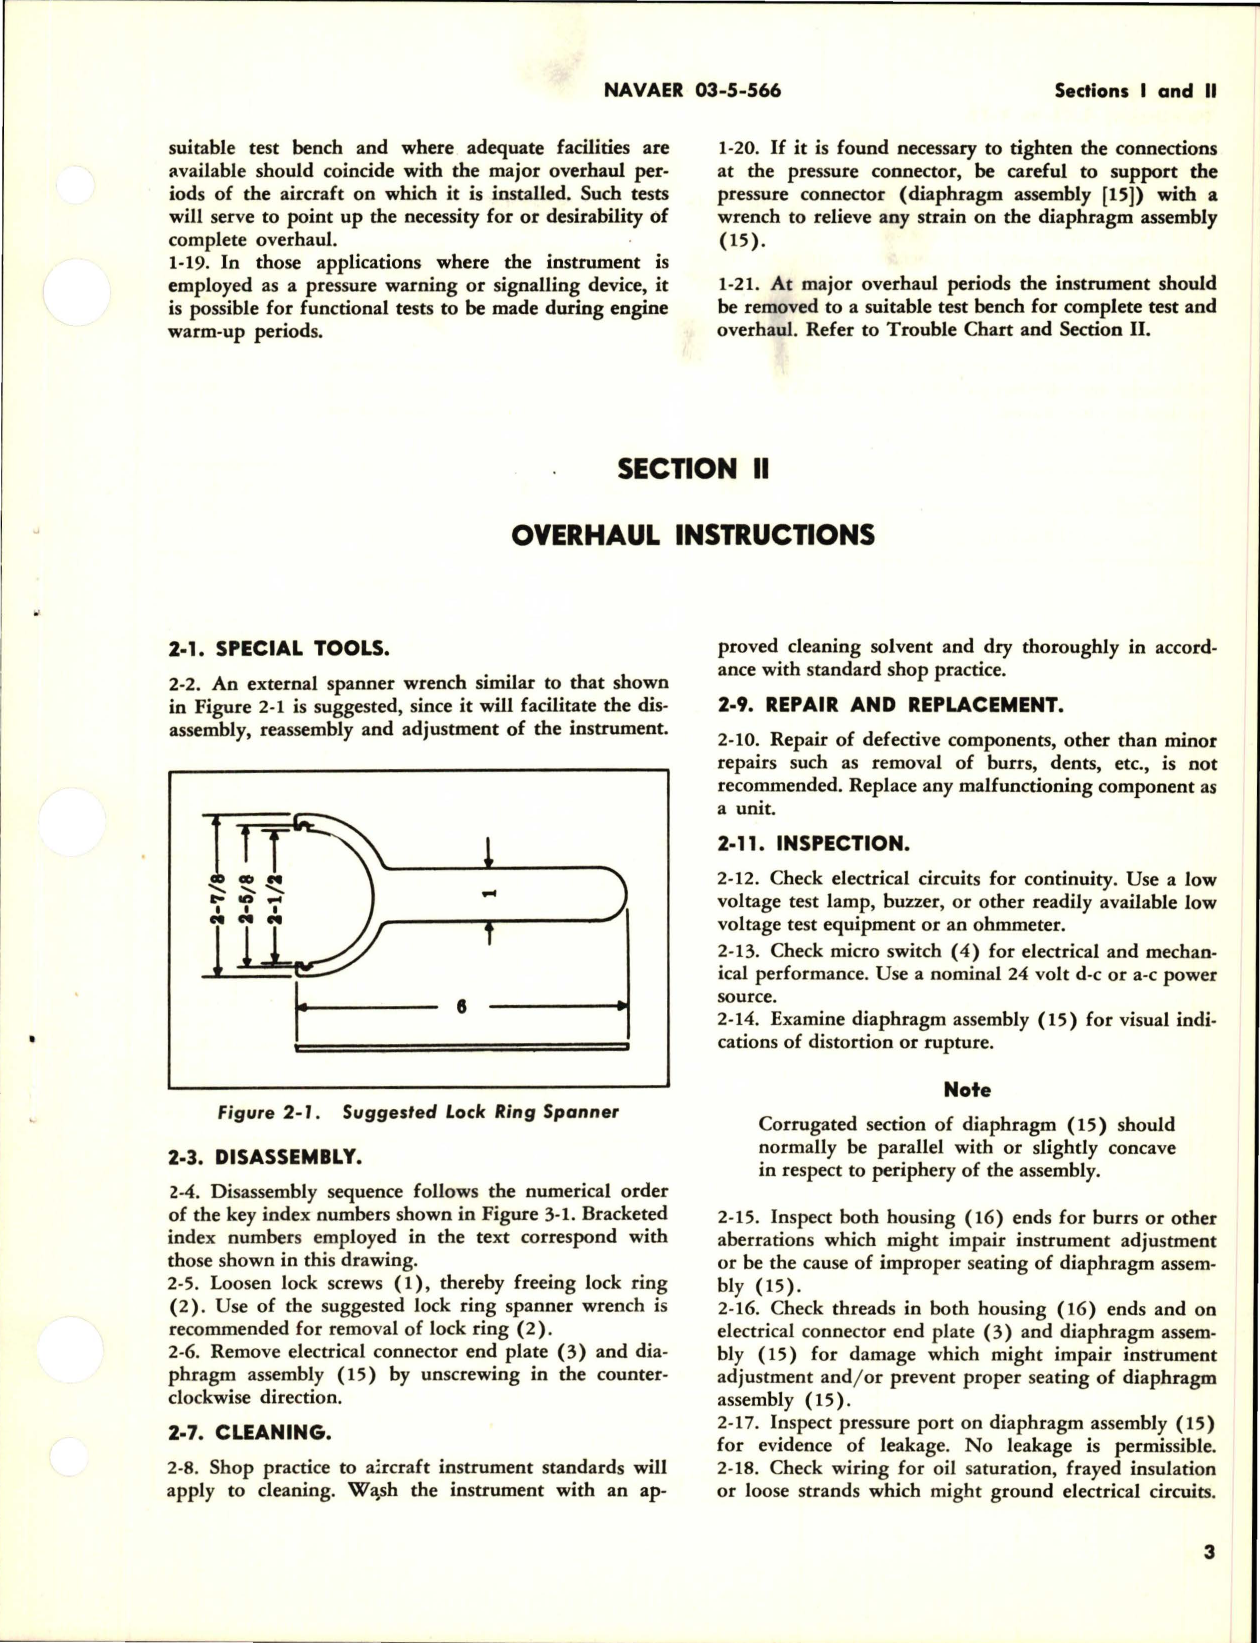 Sample page 5 from AirCorps Library document: Operation, Service and Overhaul Instructions with Parts Breakdown for Pressure Actuated Switch - Model 410-1-19